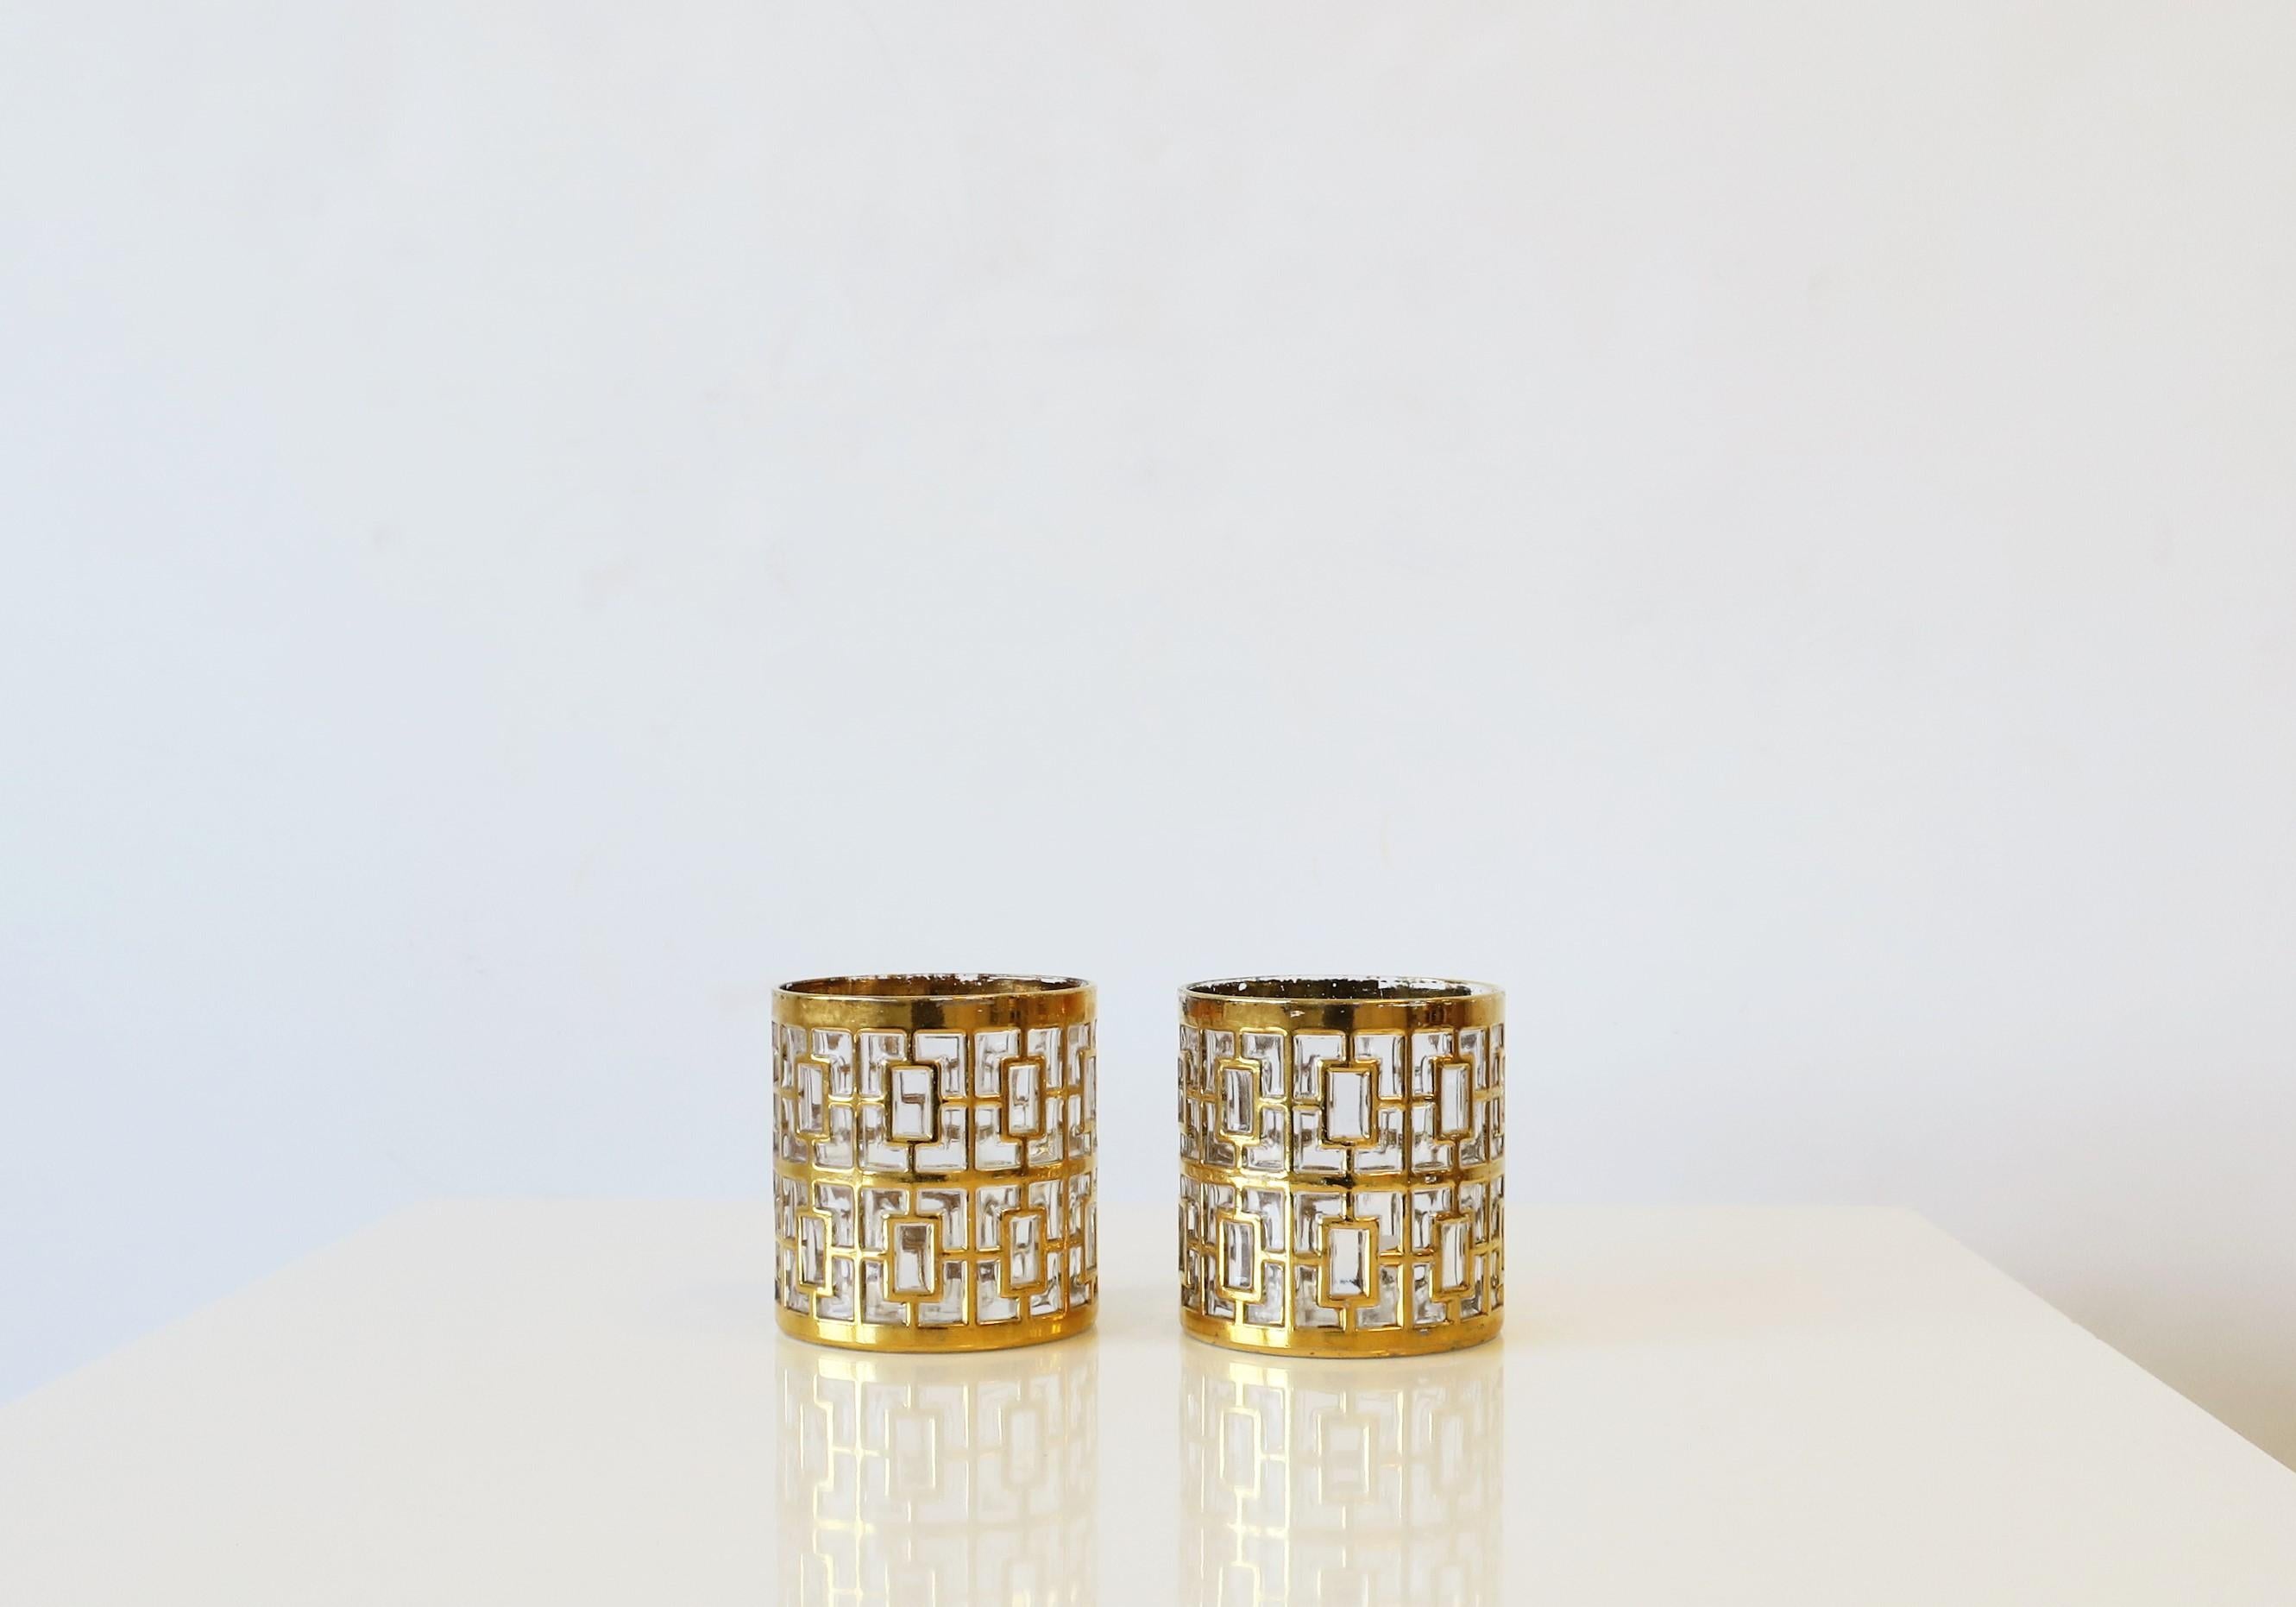 A beautiful and chic set of two (2) vintage small cocktail rocks' glasses in the Hollywood Regency style by Imperial Glass Co., circa 1960s, USA. Glasses have a 22-karat gold-plate overlay on clear glass in the 'Shoji' screen pattern, which was